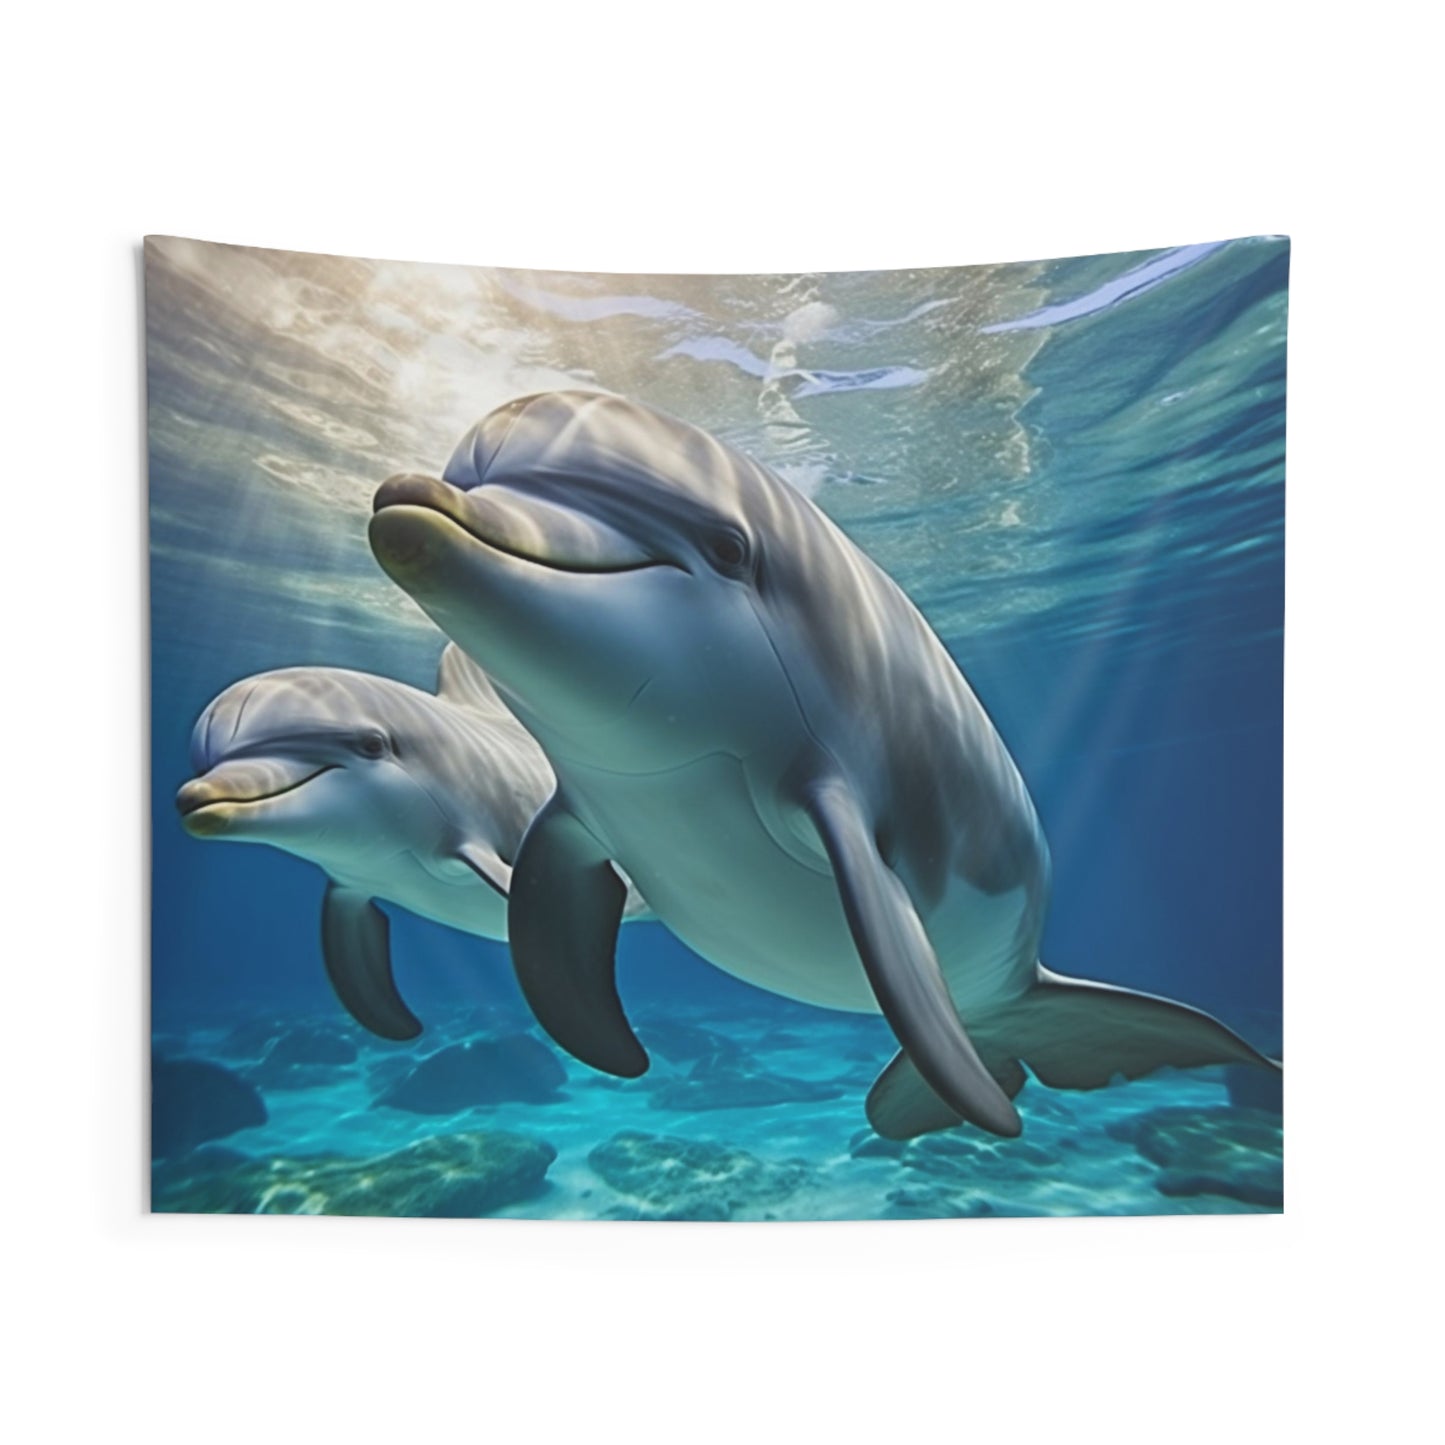 Dolphins Tapestry, Sea Ocean Underwater Wall Art Hanging Cool Unique Landscape Aesthetic Large Small Decor Bedroom College Dorm Room Starcove Fashion